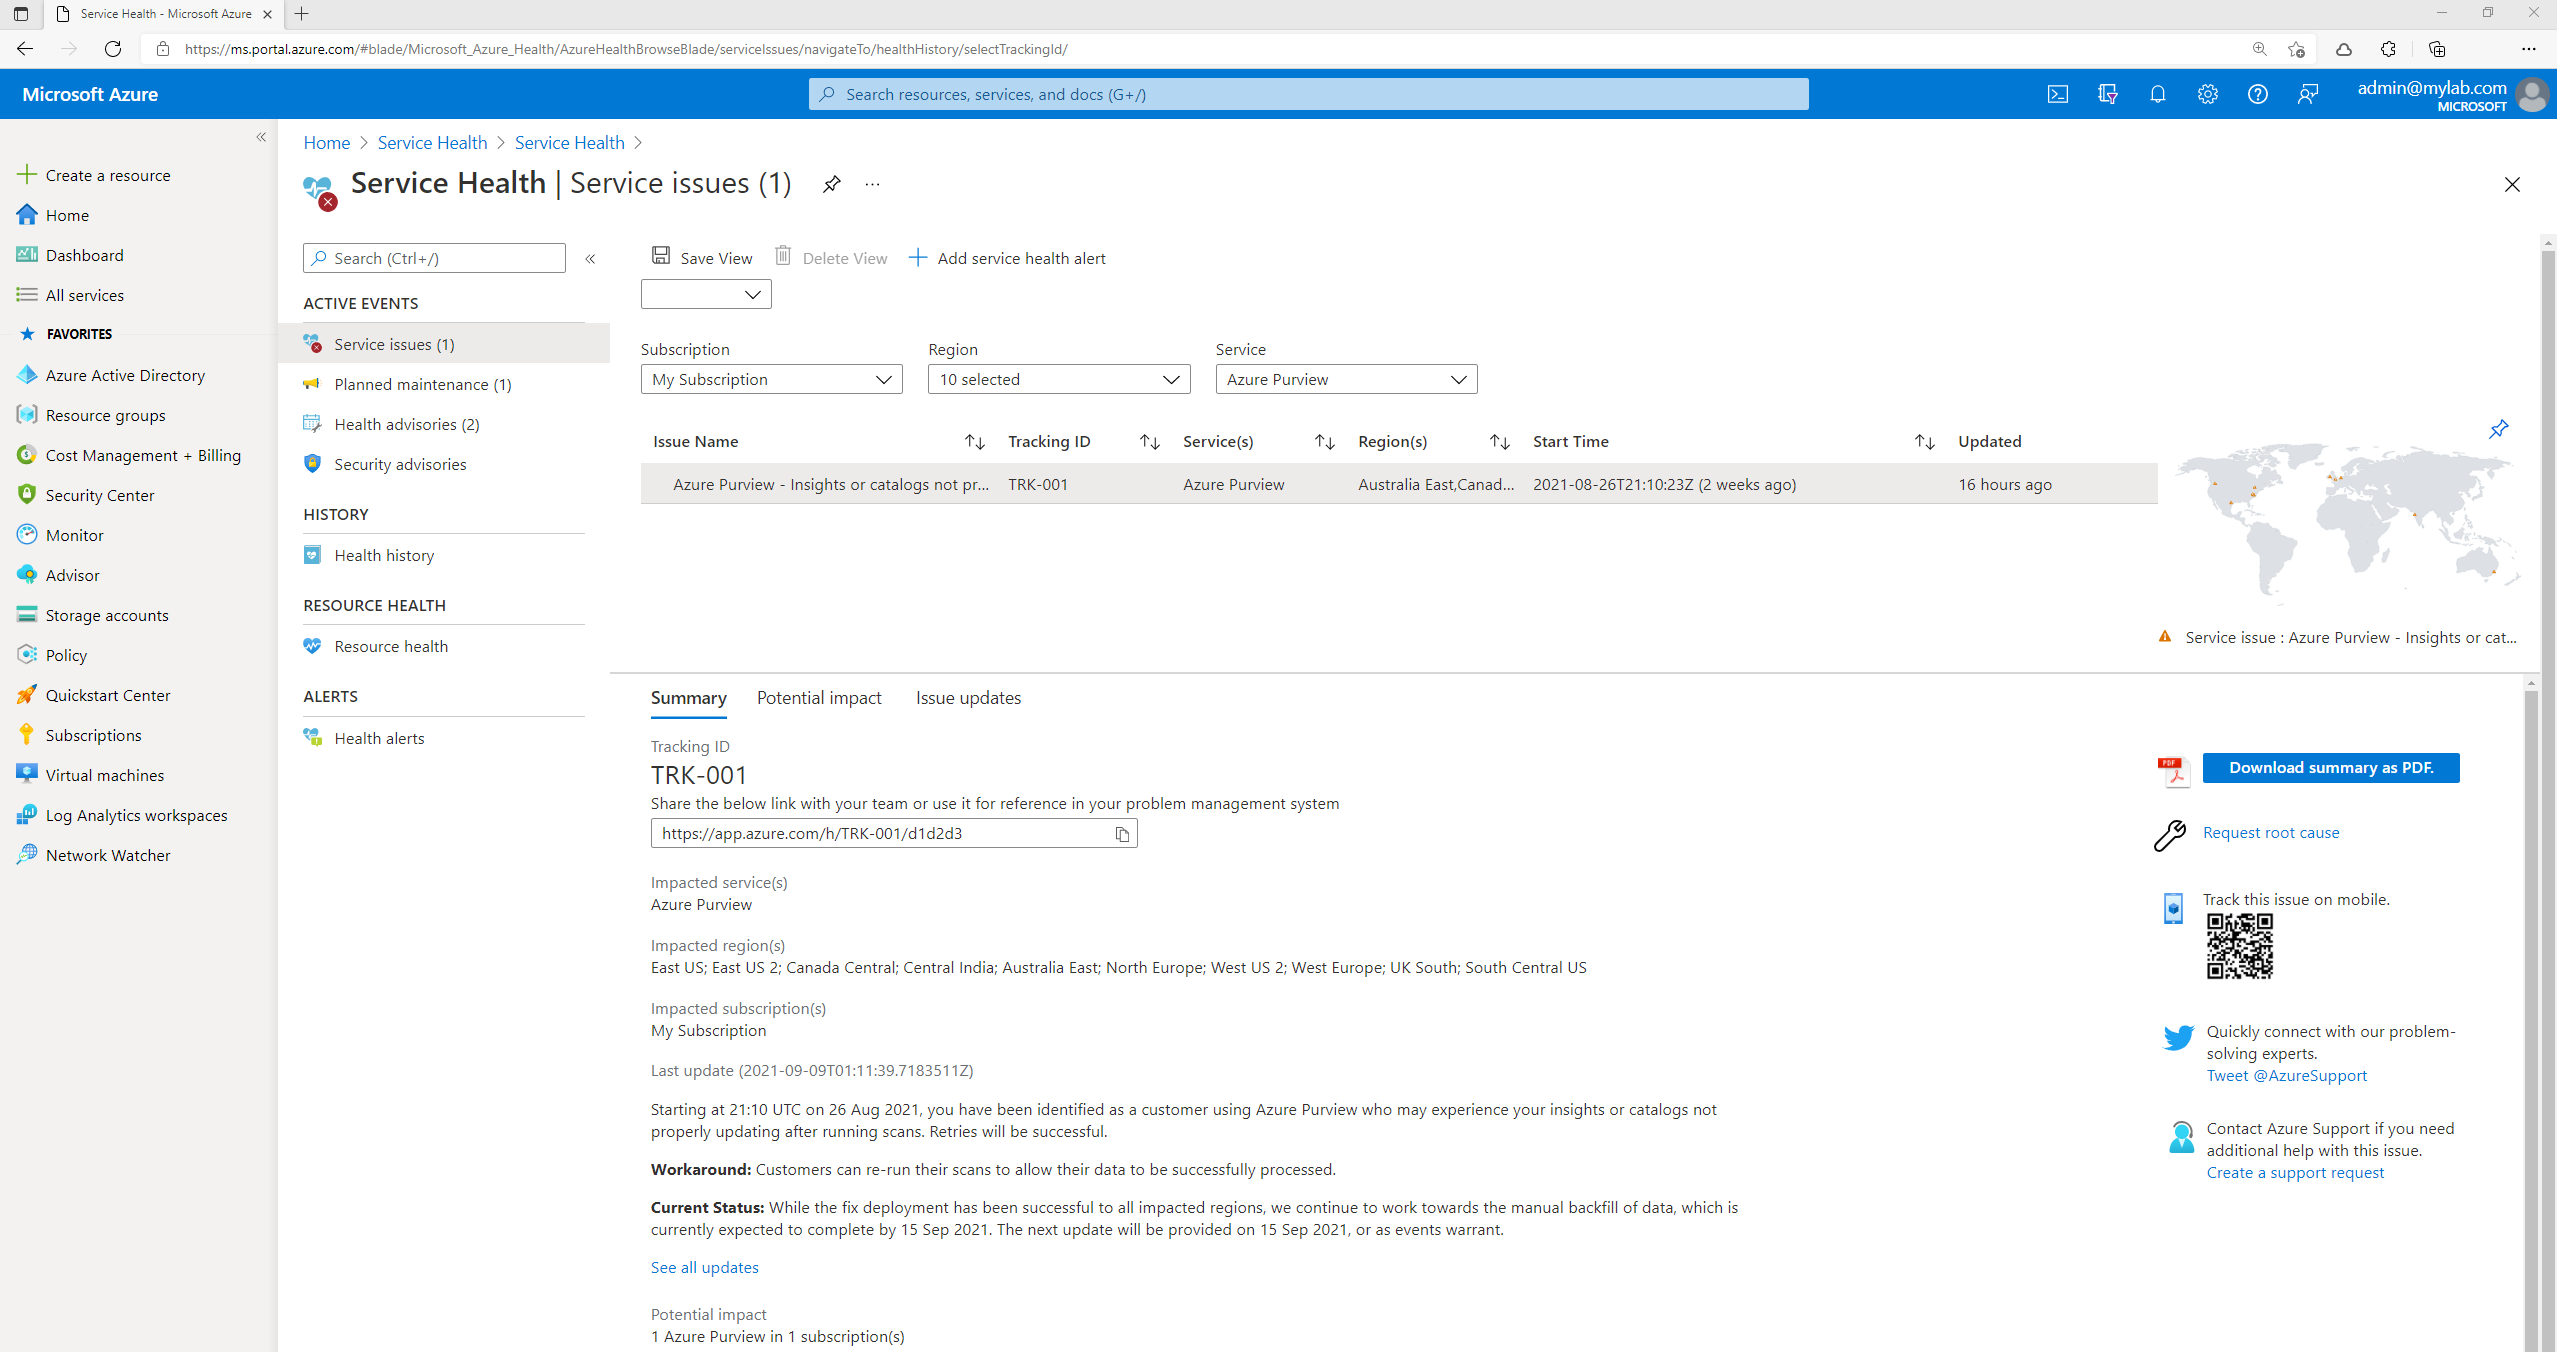 Screenshot of Azure Service Health showing the overall information provided